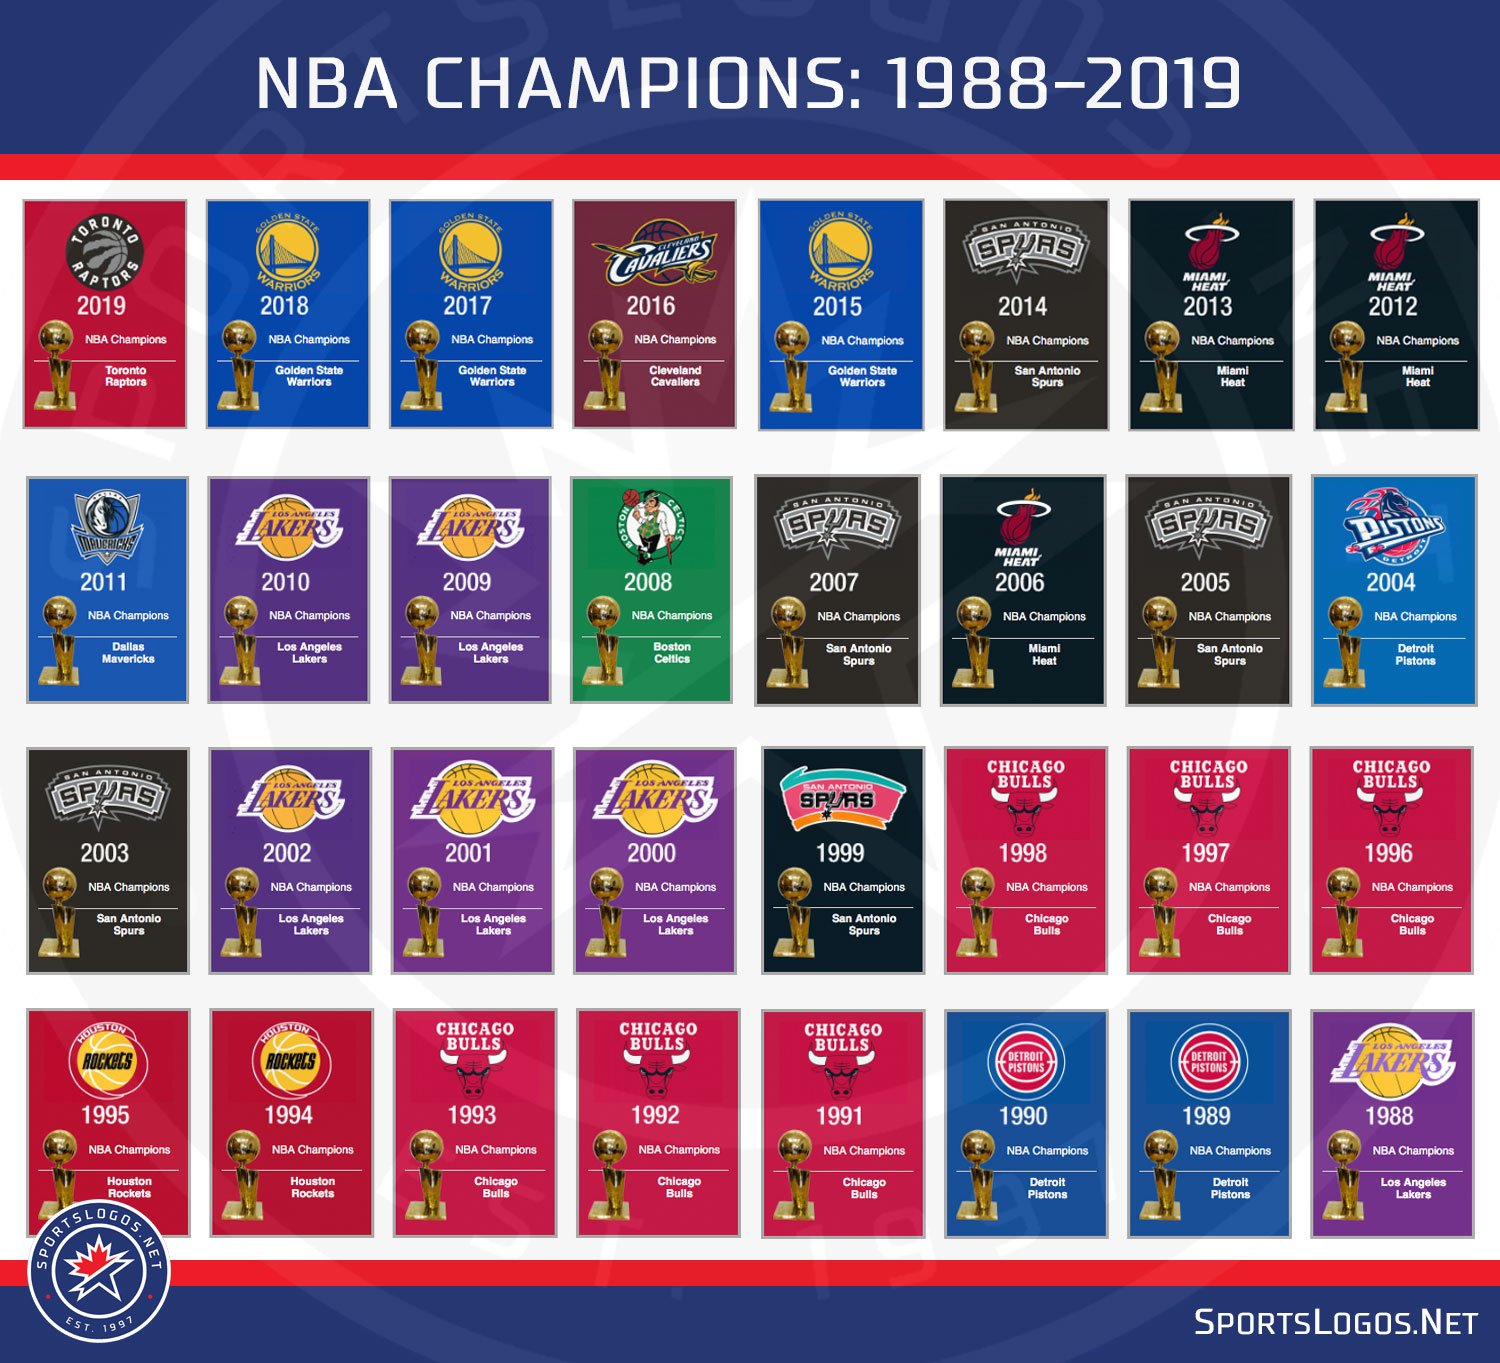 NBA Champions by Year: Complete list of NBA Finals winners